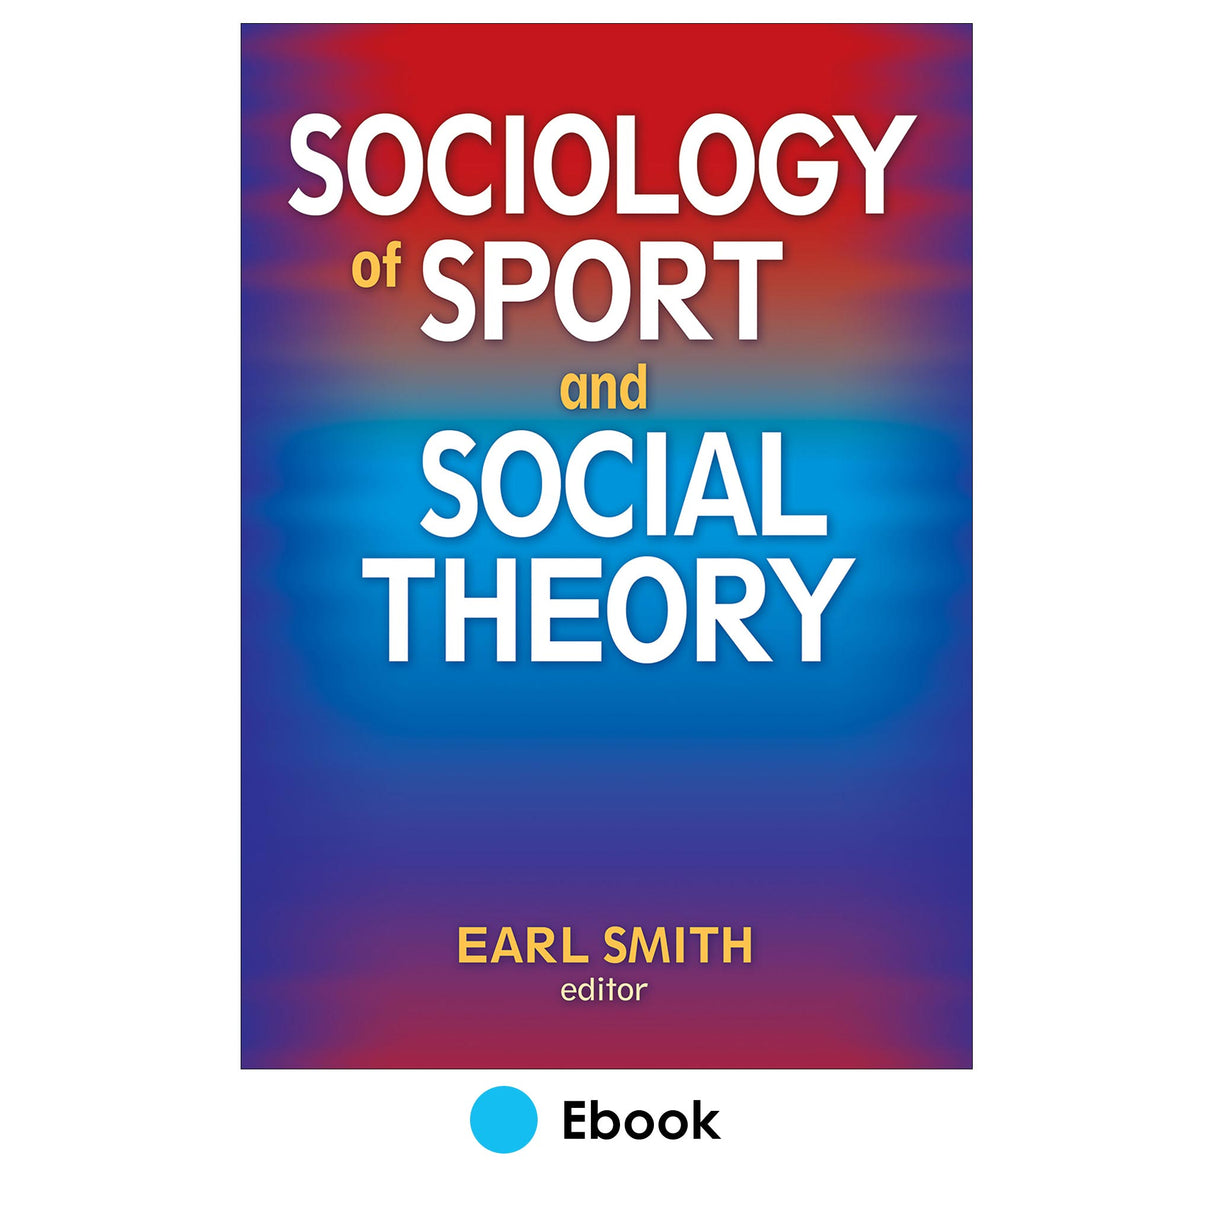 Sociology of Sport and Social Theory PDF